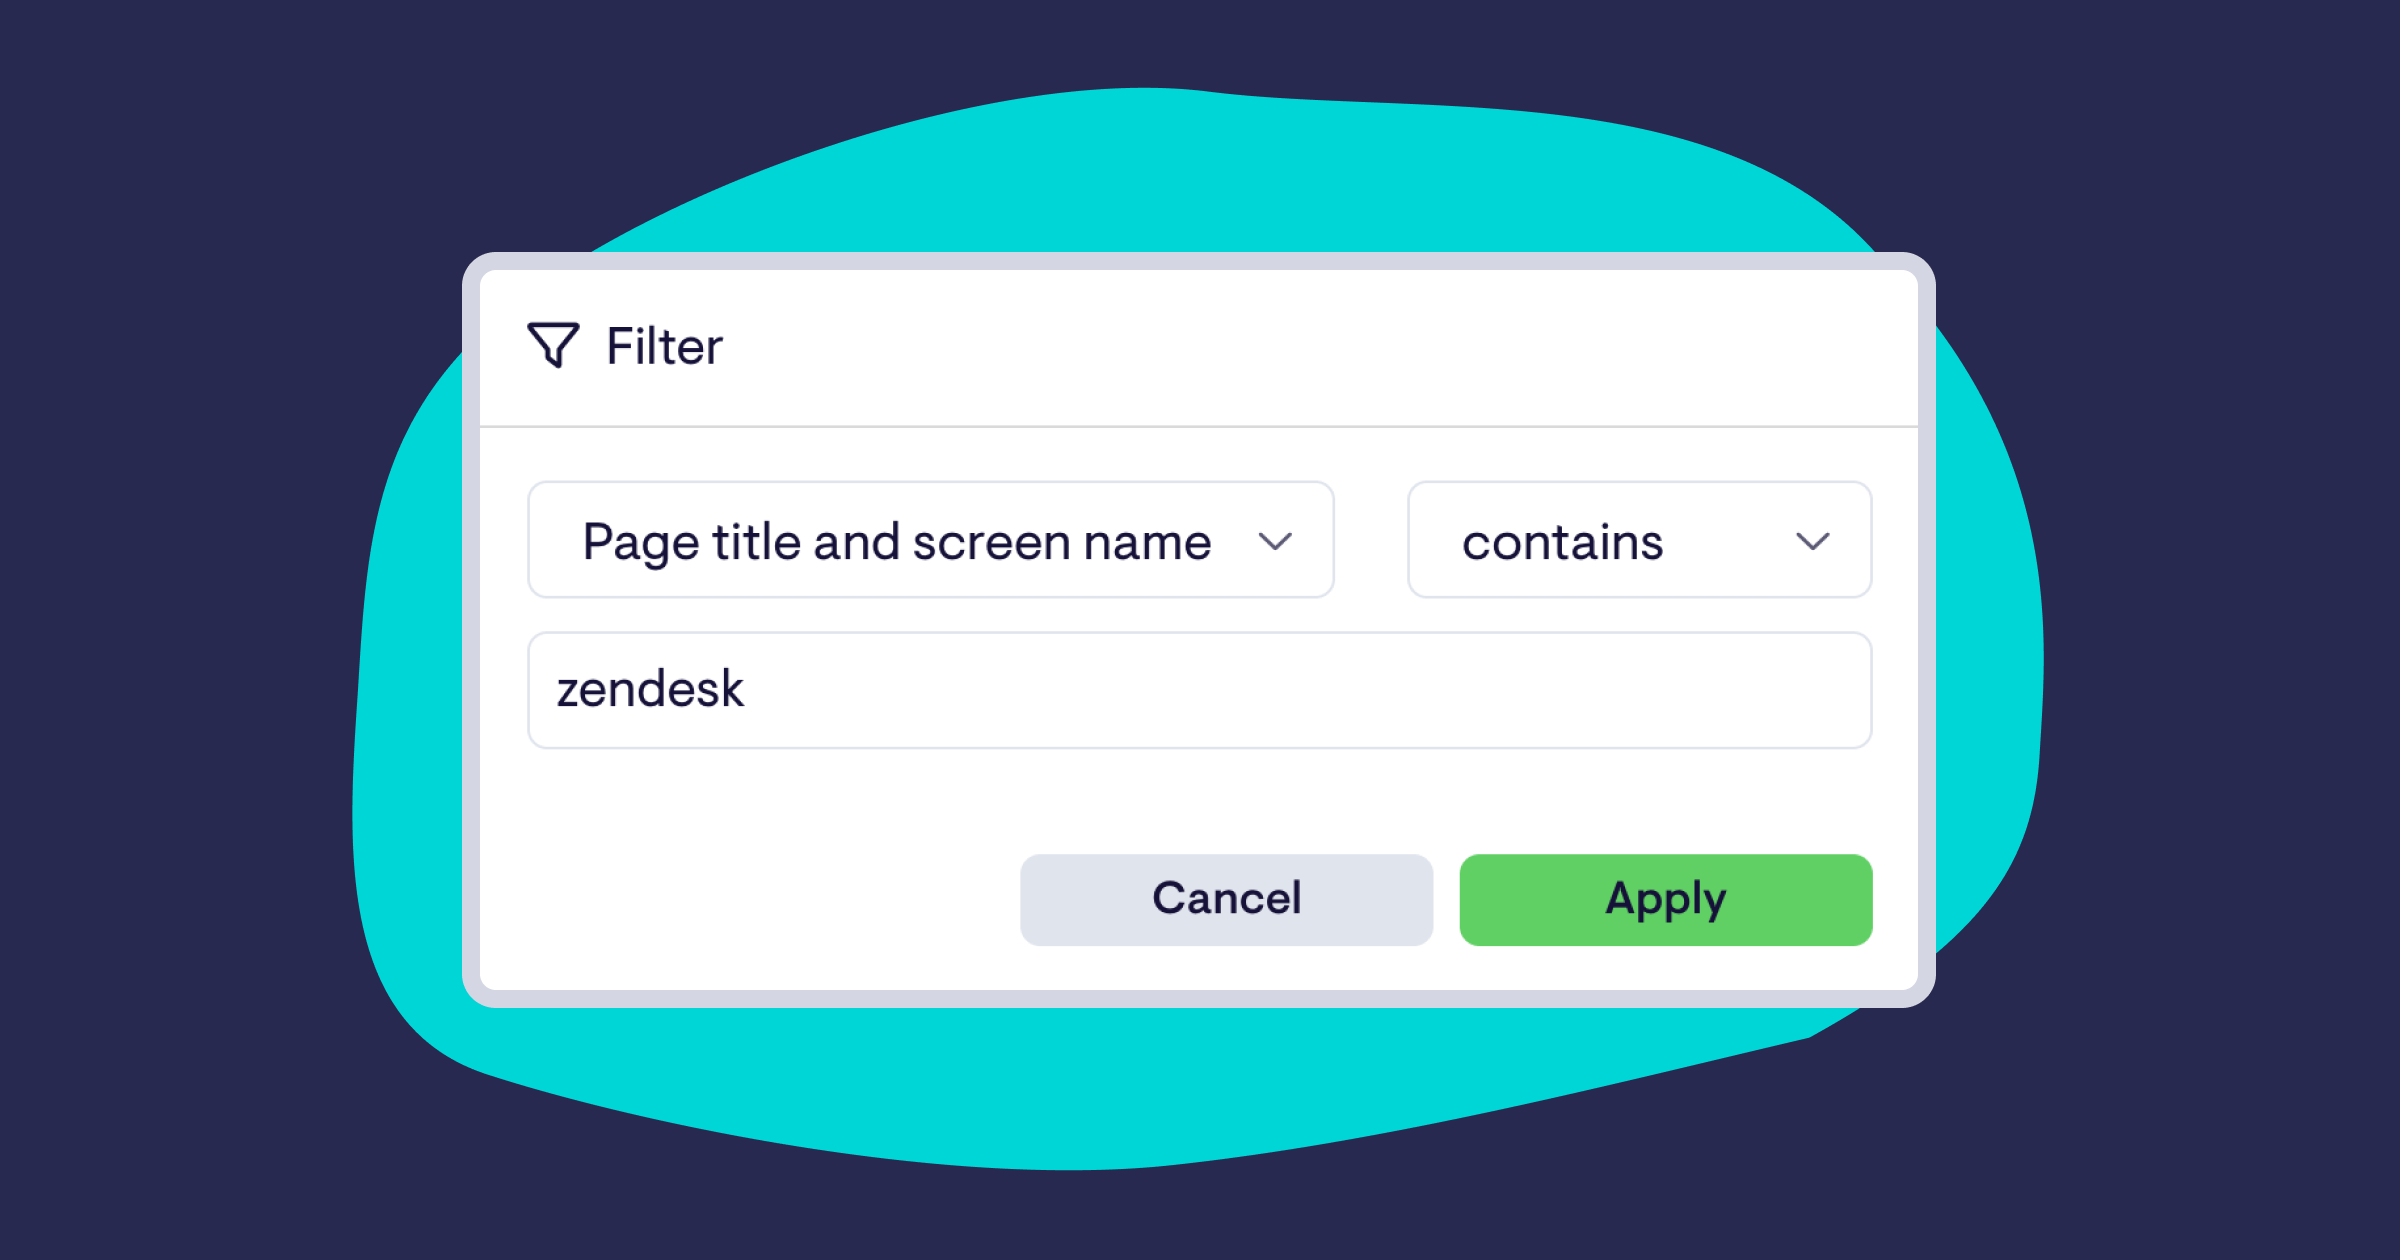 ga4-contains-filter.png